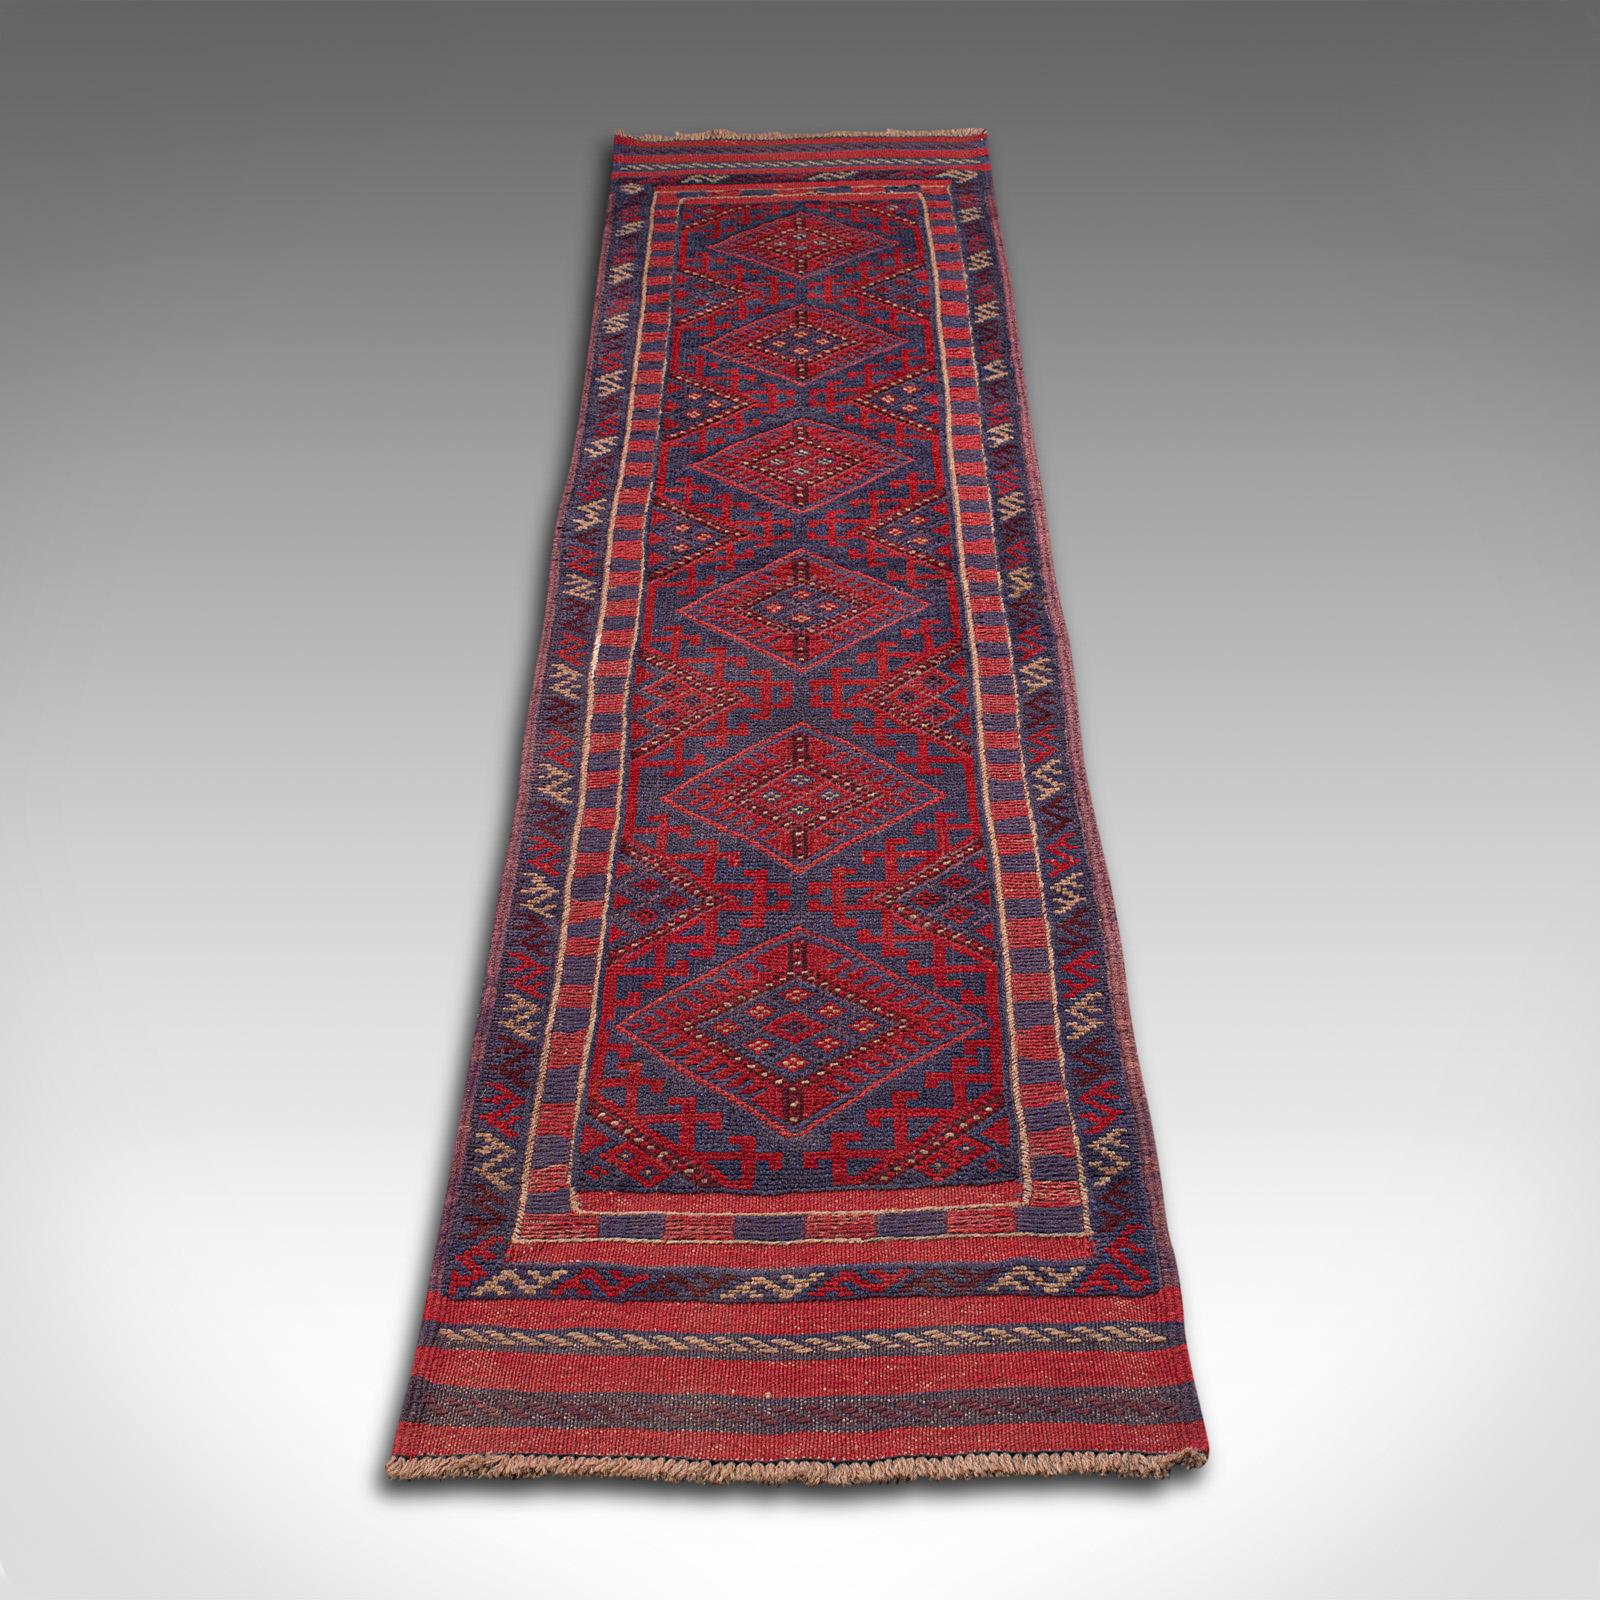 This is a long vintage Meshwani hallway runner. A Caucasian, woven rug or hall carpet, dating to the mid 20th century, circa 1960.

Of useful reception hall size at 61cm x 273cm (24